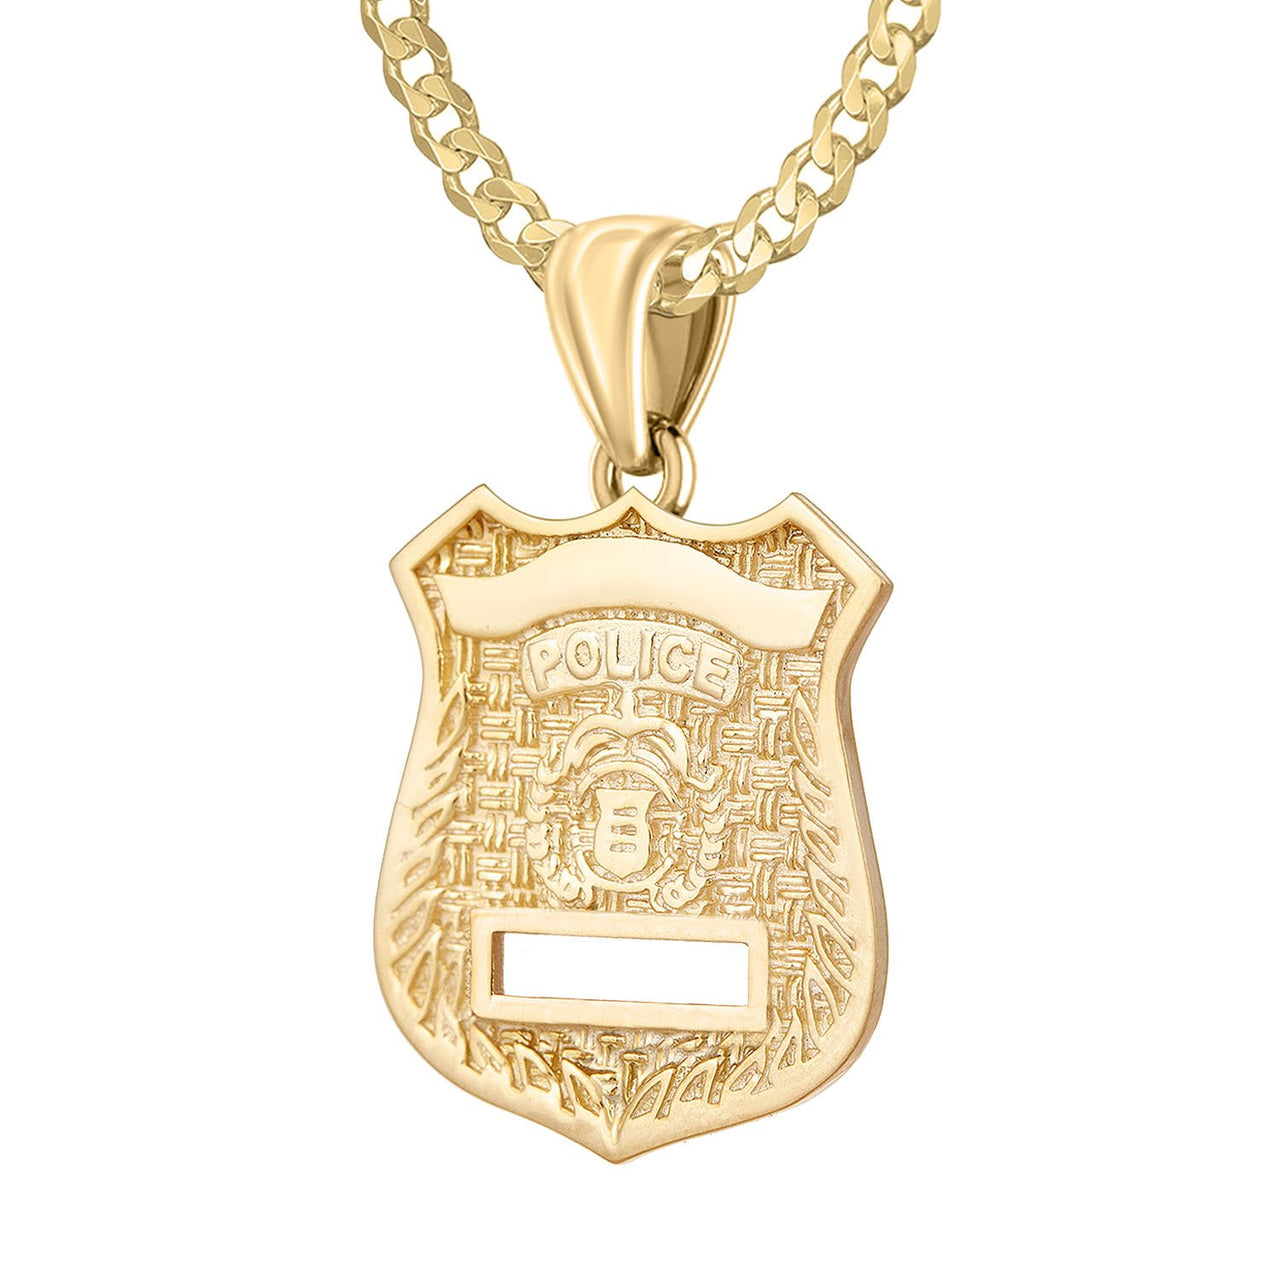 Police Badge Necklace In Gold of 26mm - 2.6mm Curb Chain